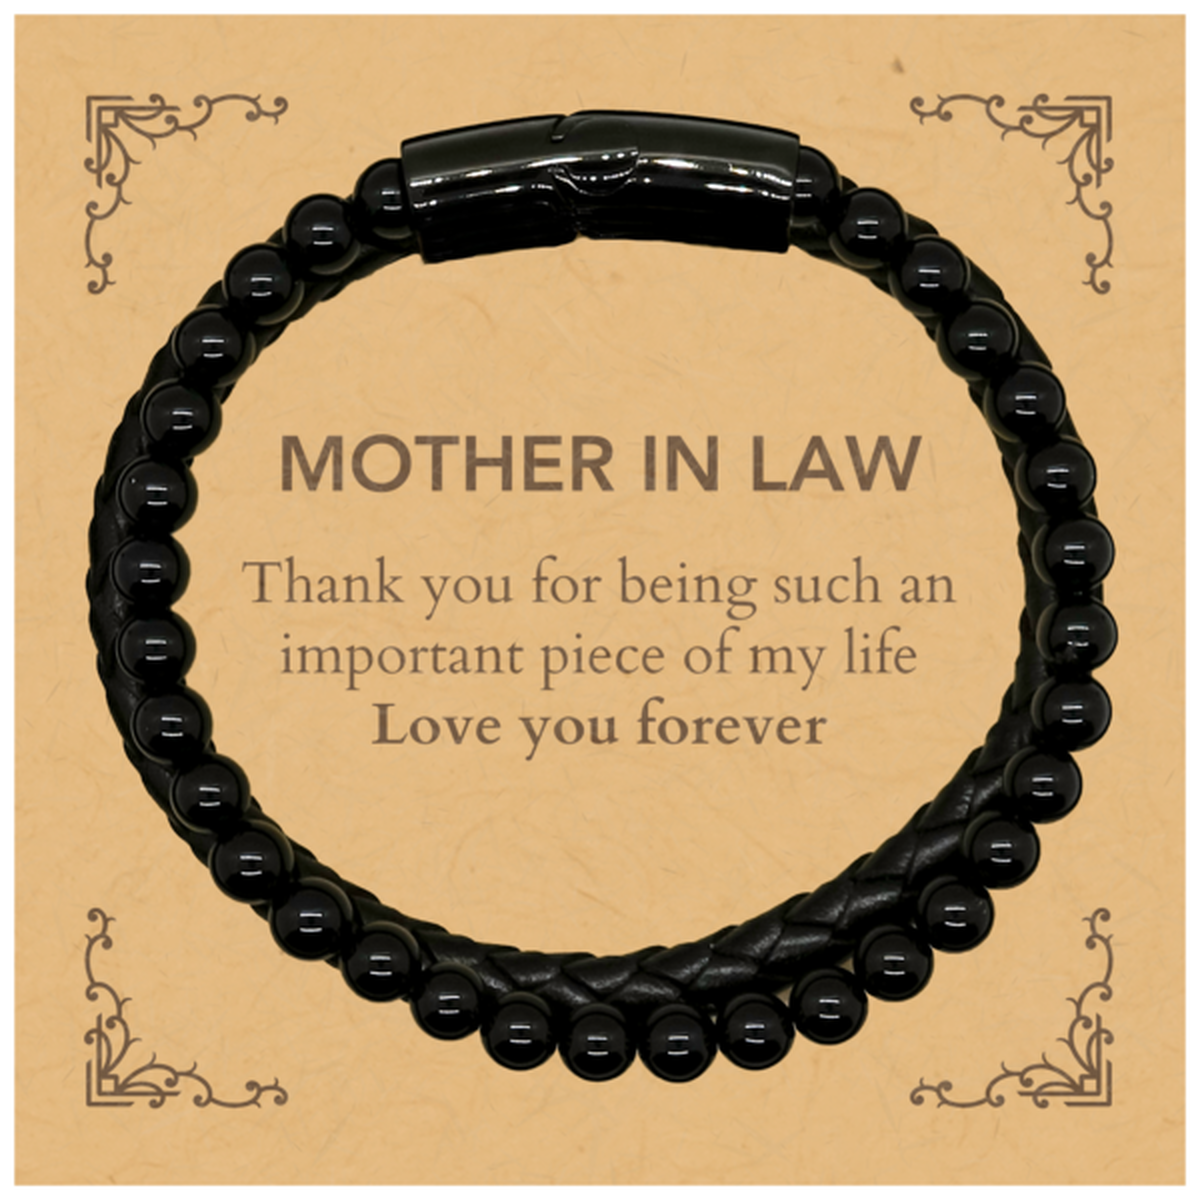 Appropriate Mother In Law Stone Leather Bracelets Epic Birthday Gifts for Mother In Law Thank you for being such an important piece of my life Mother In Law Christmas Mothers Fathers Day